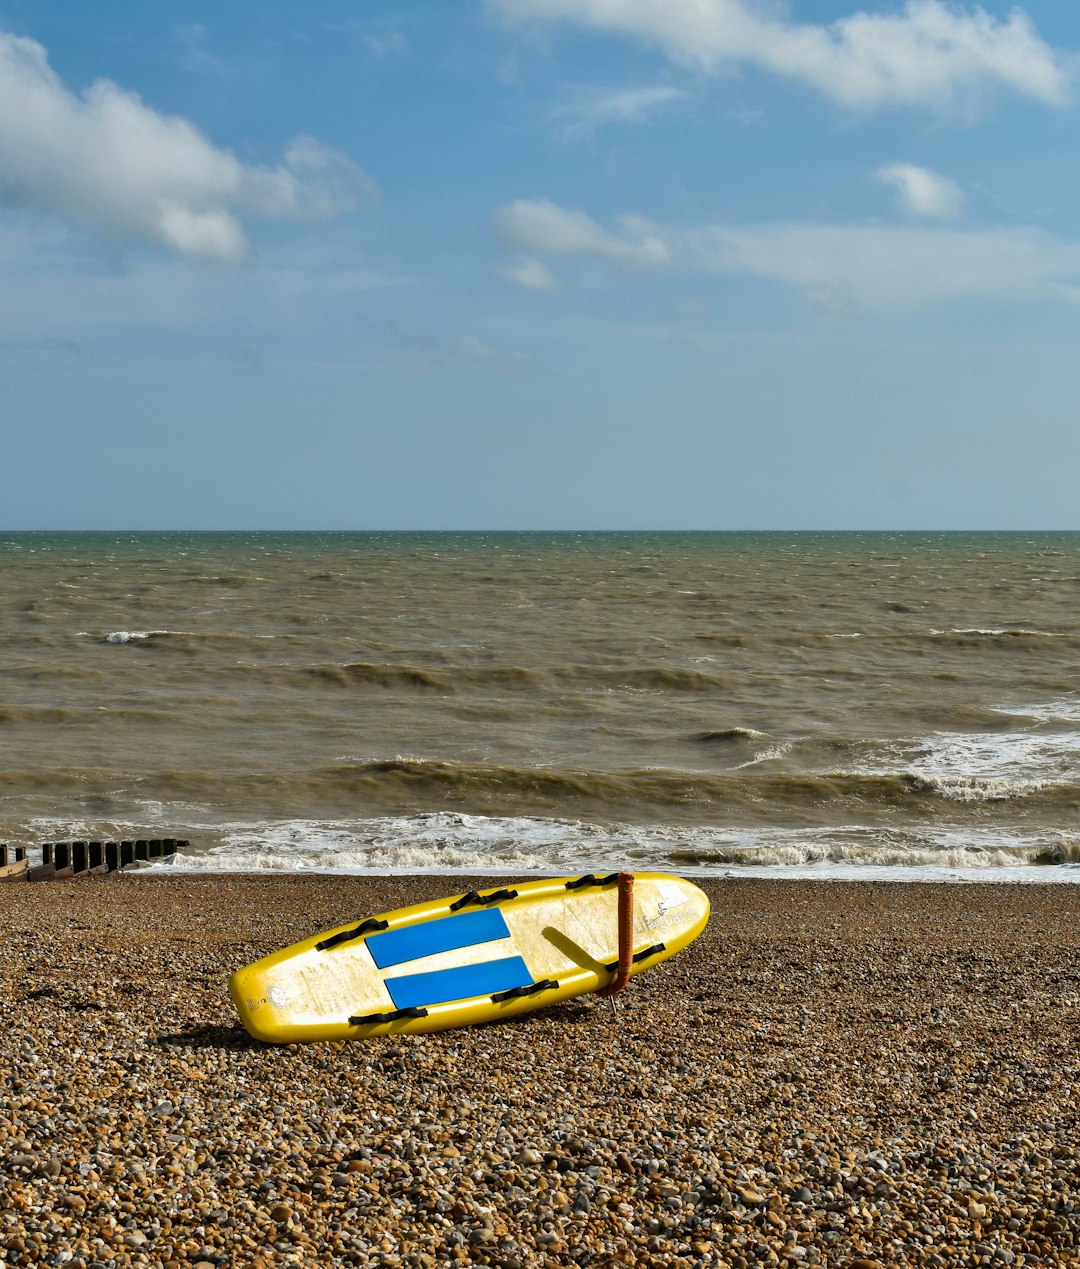 yellow and blue kayak on beach shore during daytime